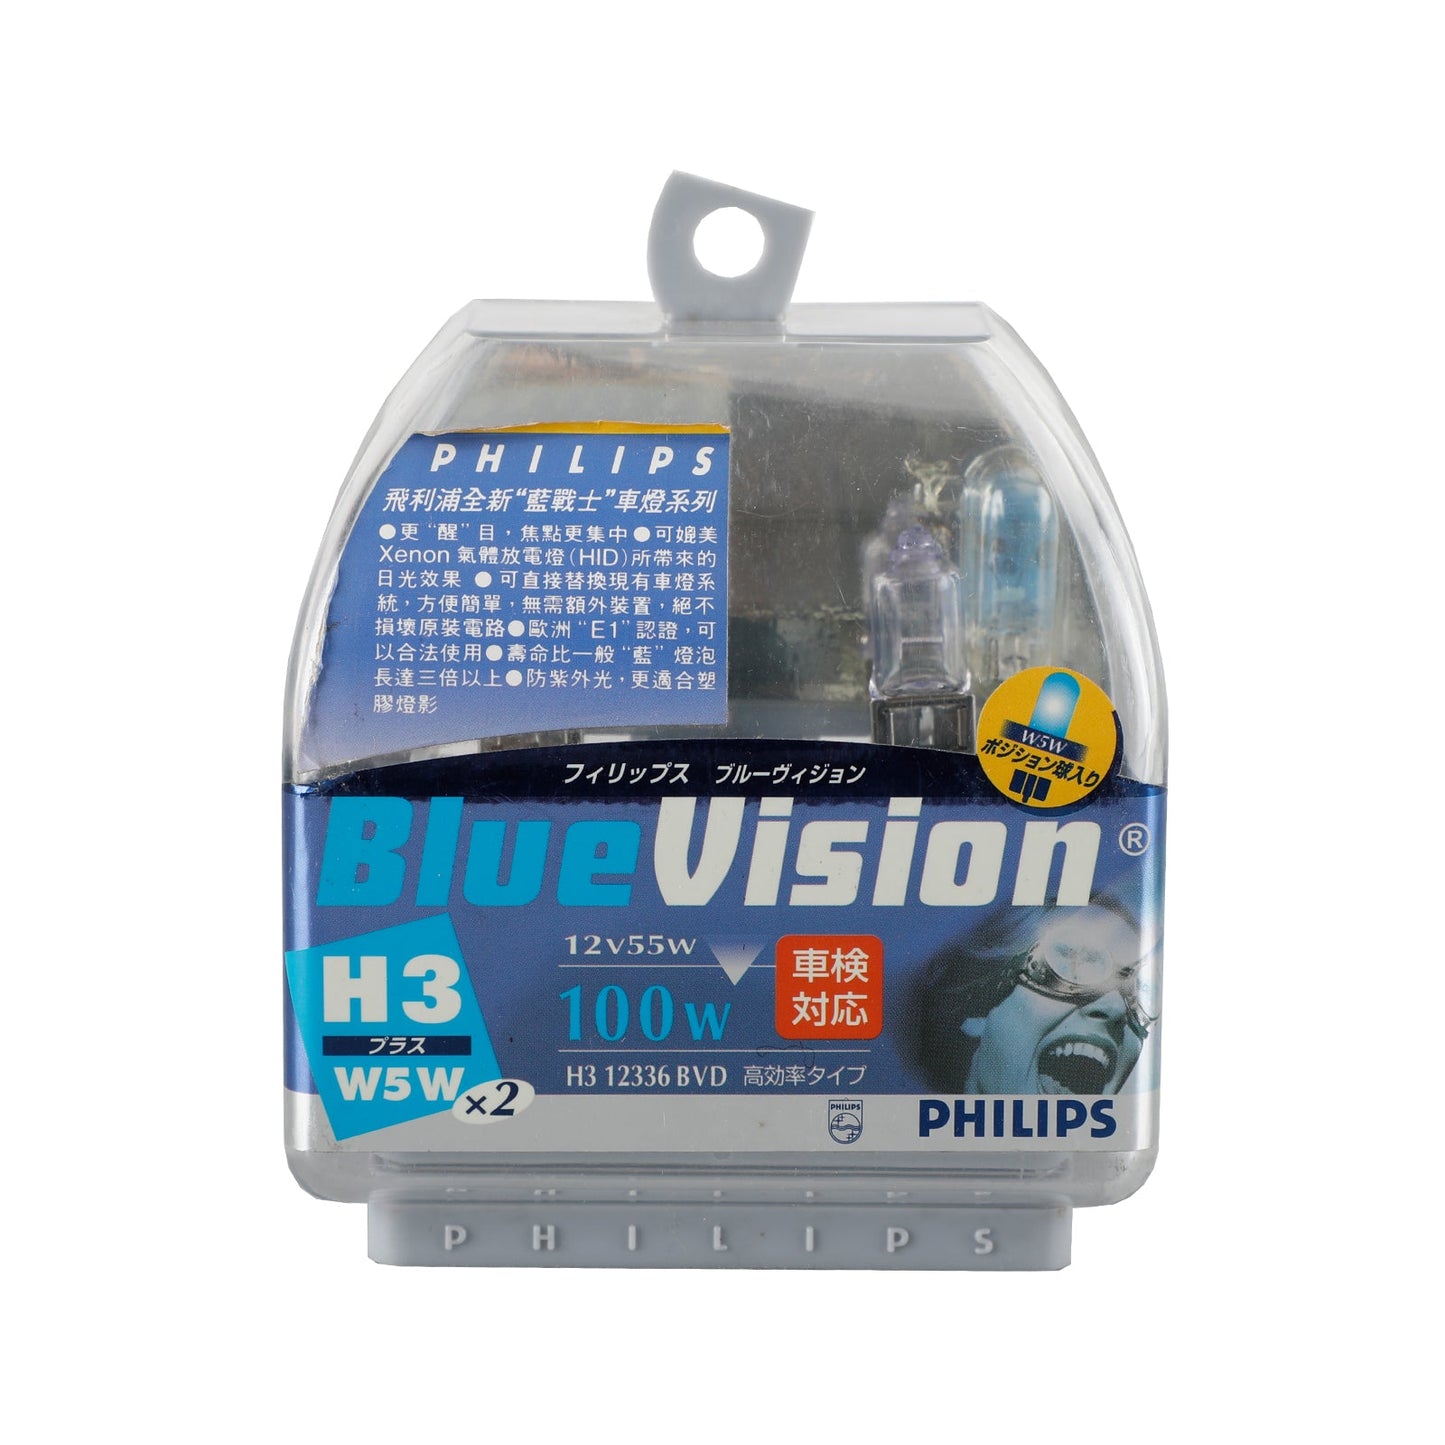 For Philips 12336BVD BlueVision H3 12V 55W W5W PK22S Car Headlights